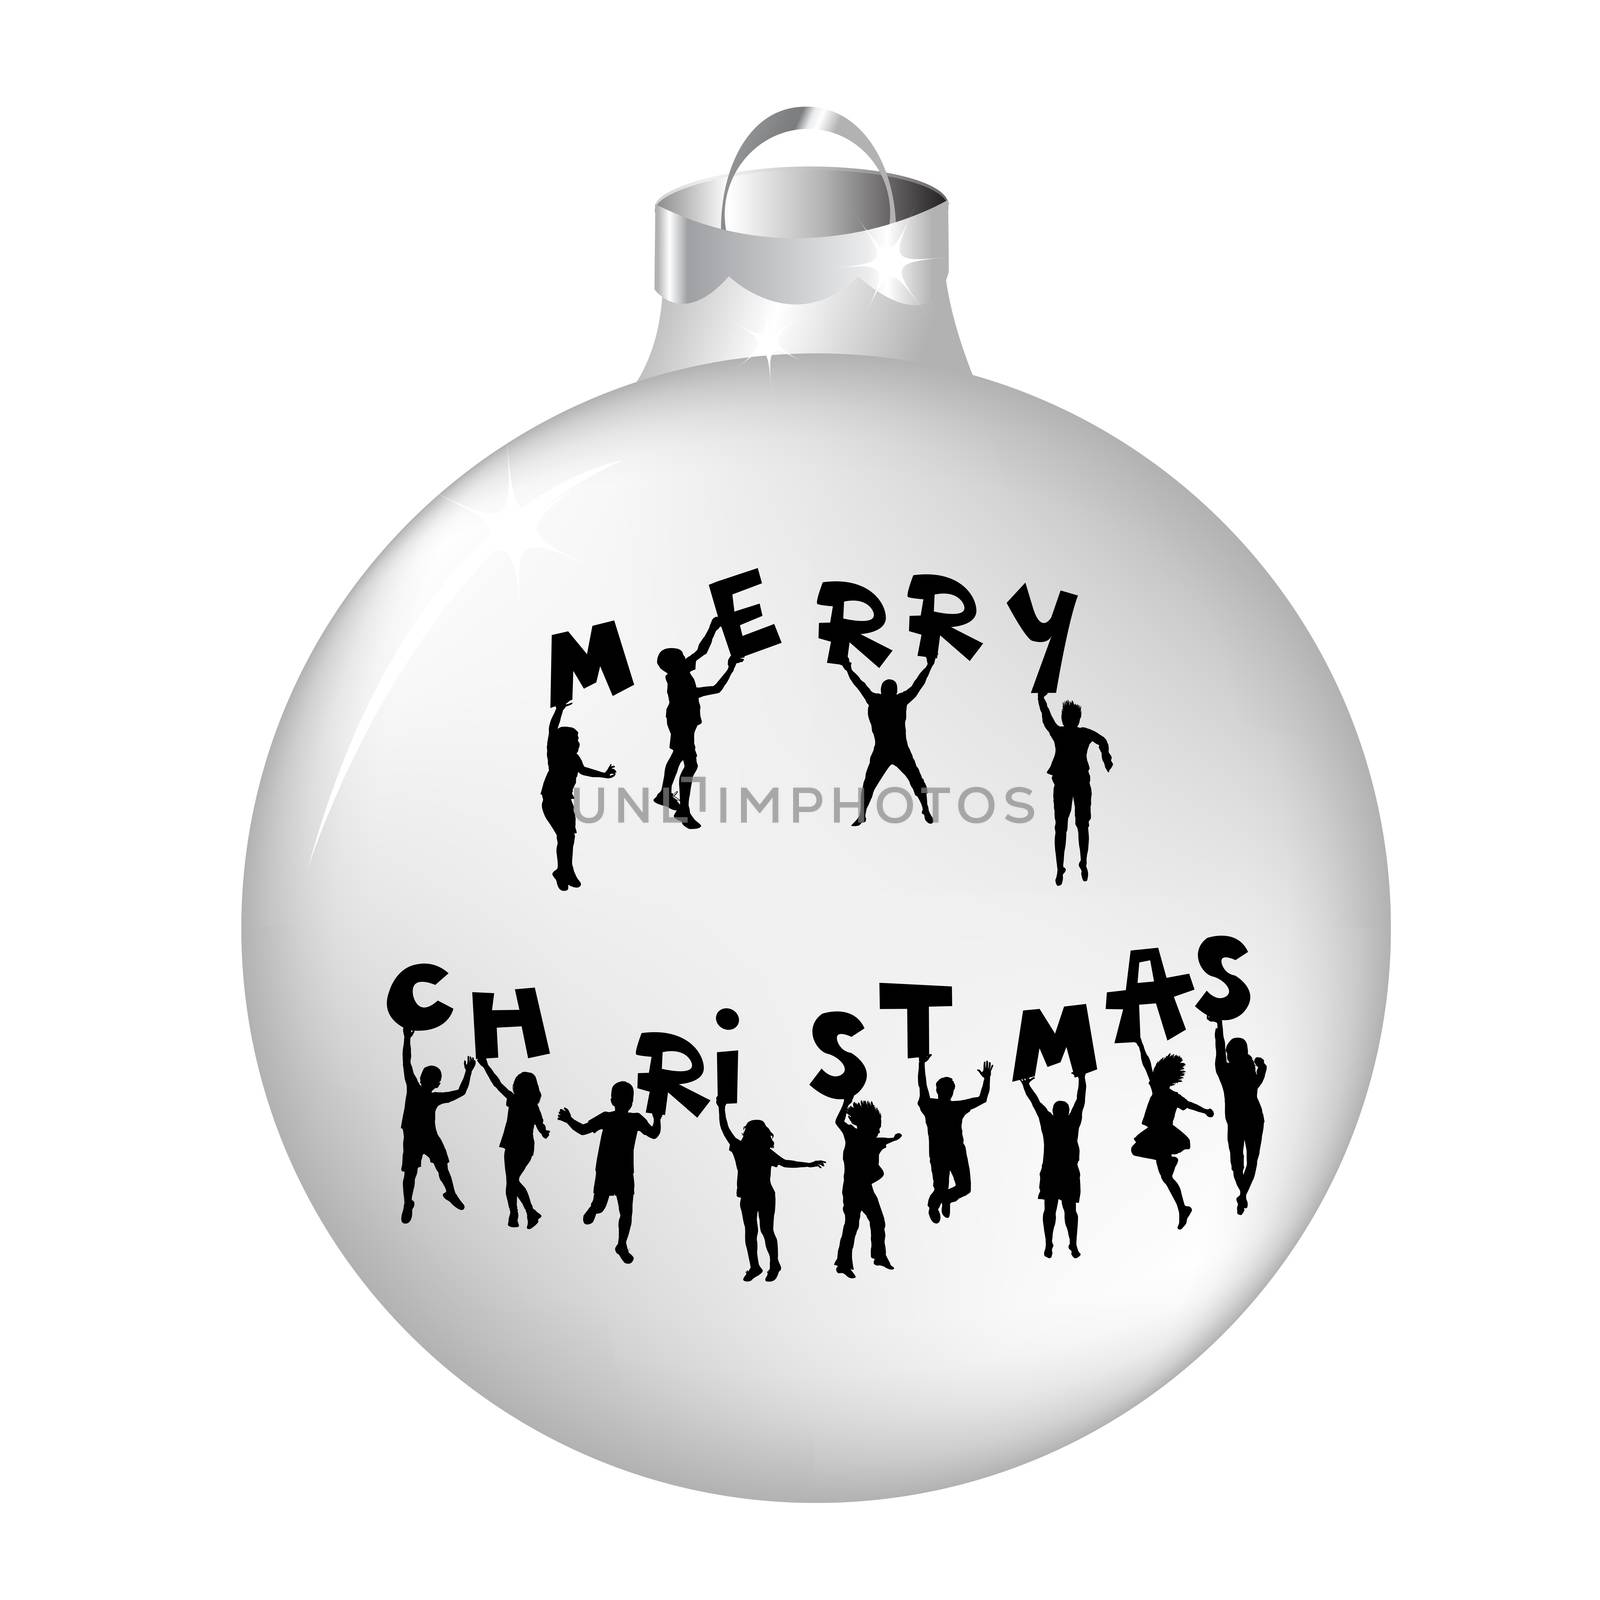 Christmas ball with kids silhouettes by hibrida13